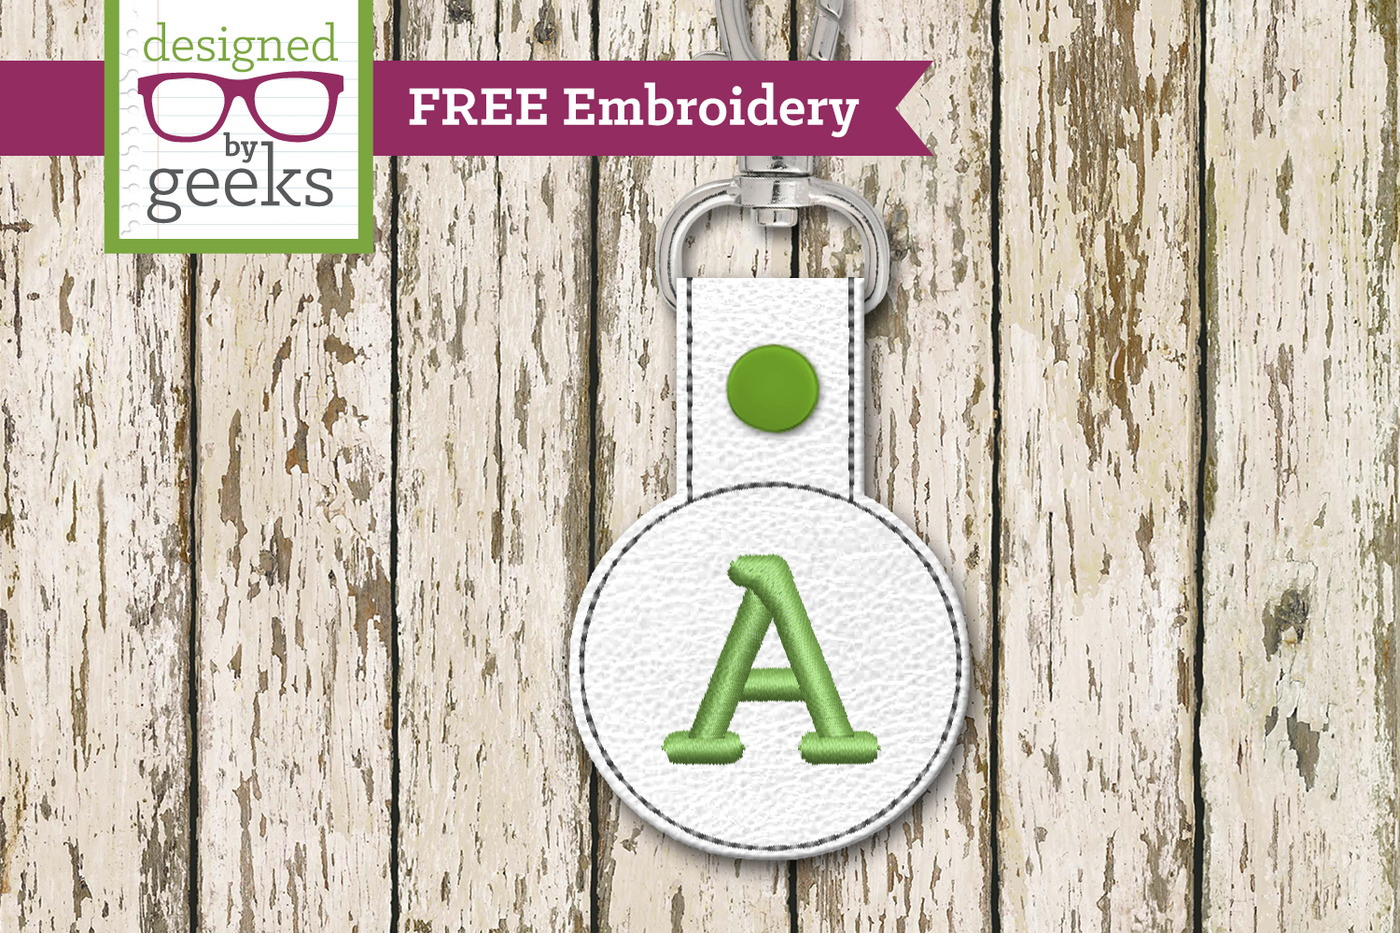 Free A Key fob embroidery in the hoop design